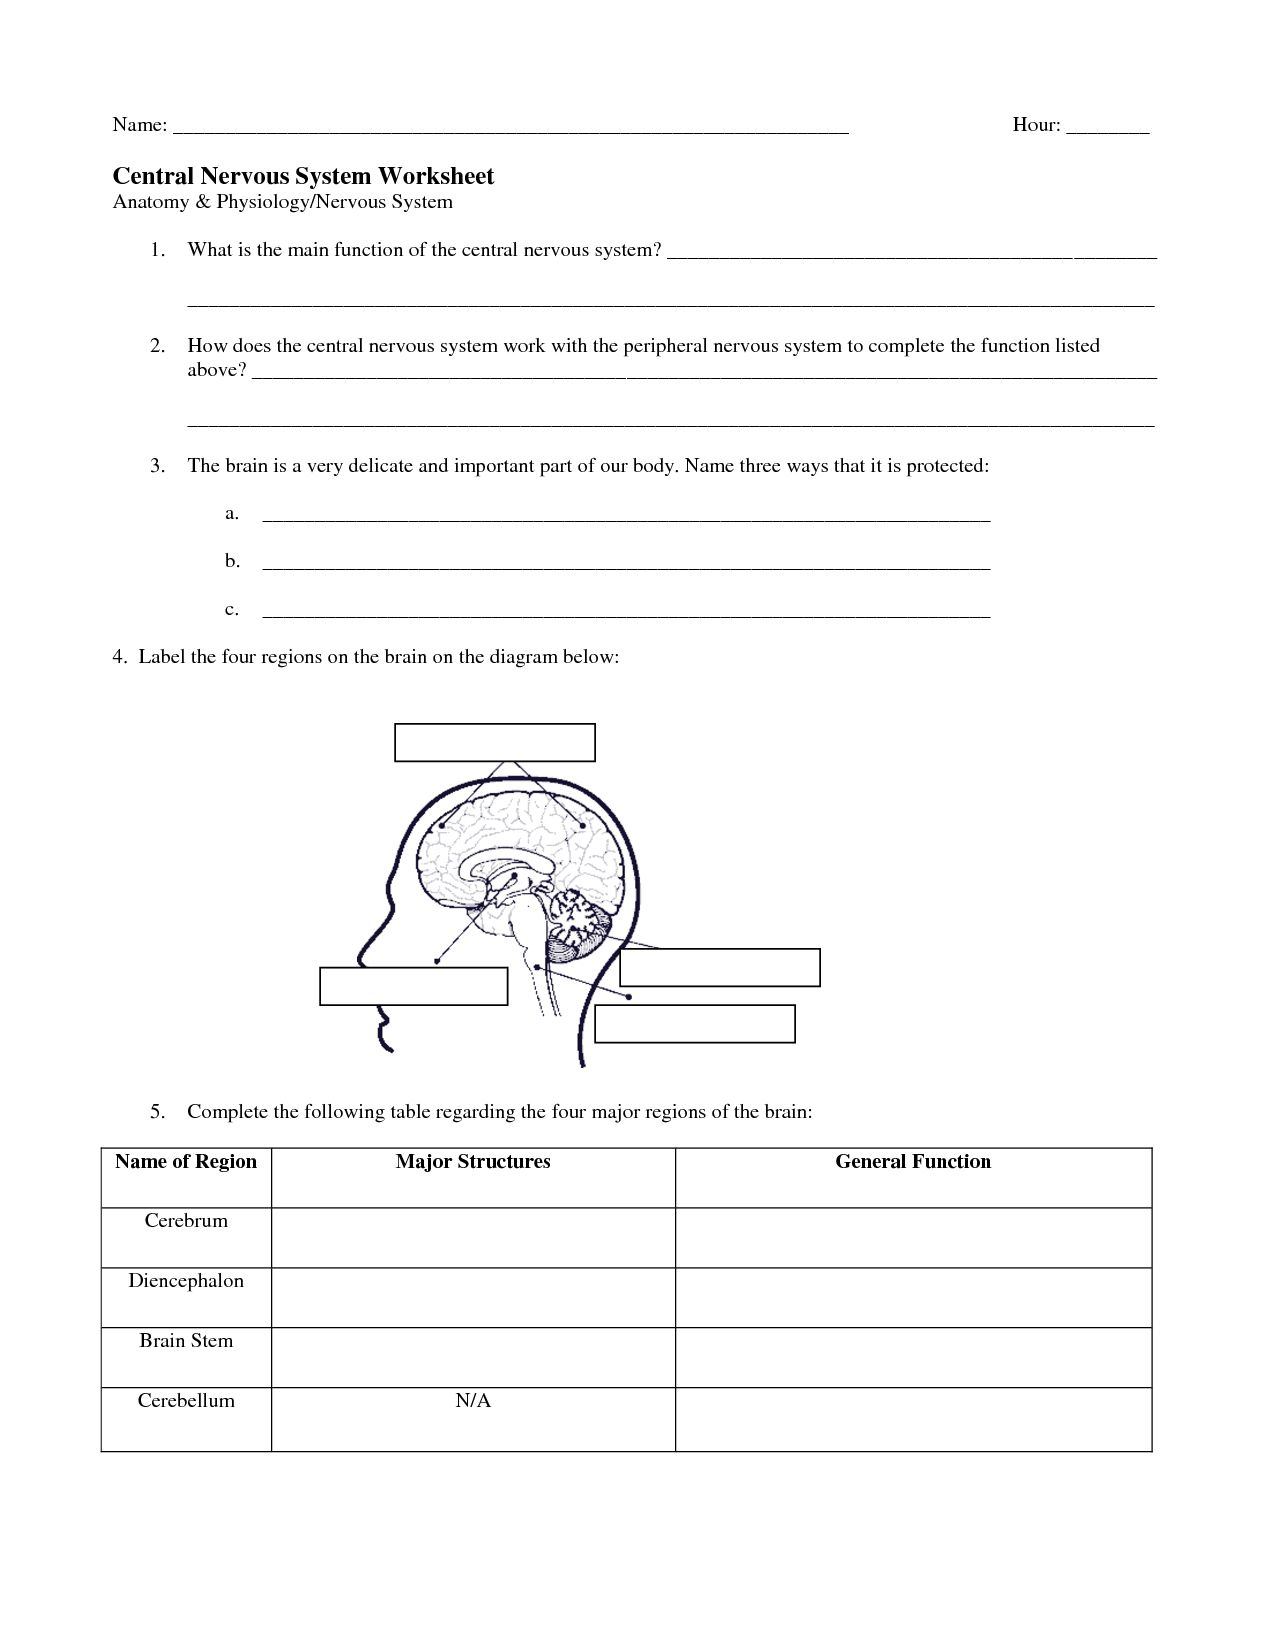 Central Nervous System Coloring Pages Worksheets On The Brain For Anatomy Justswimfl